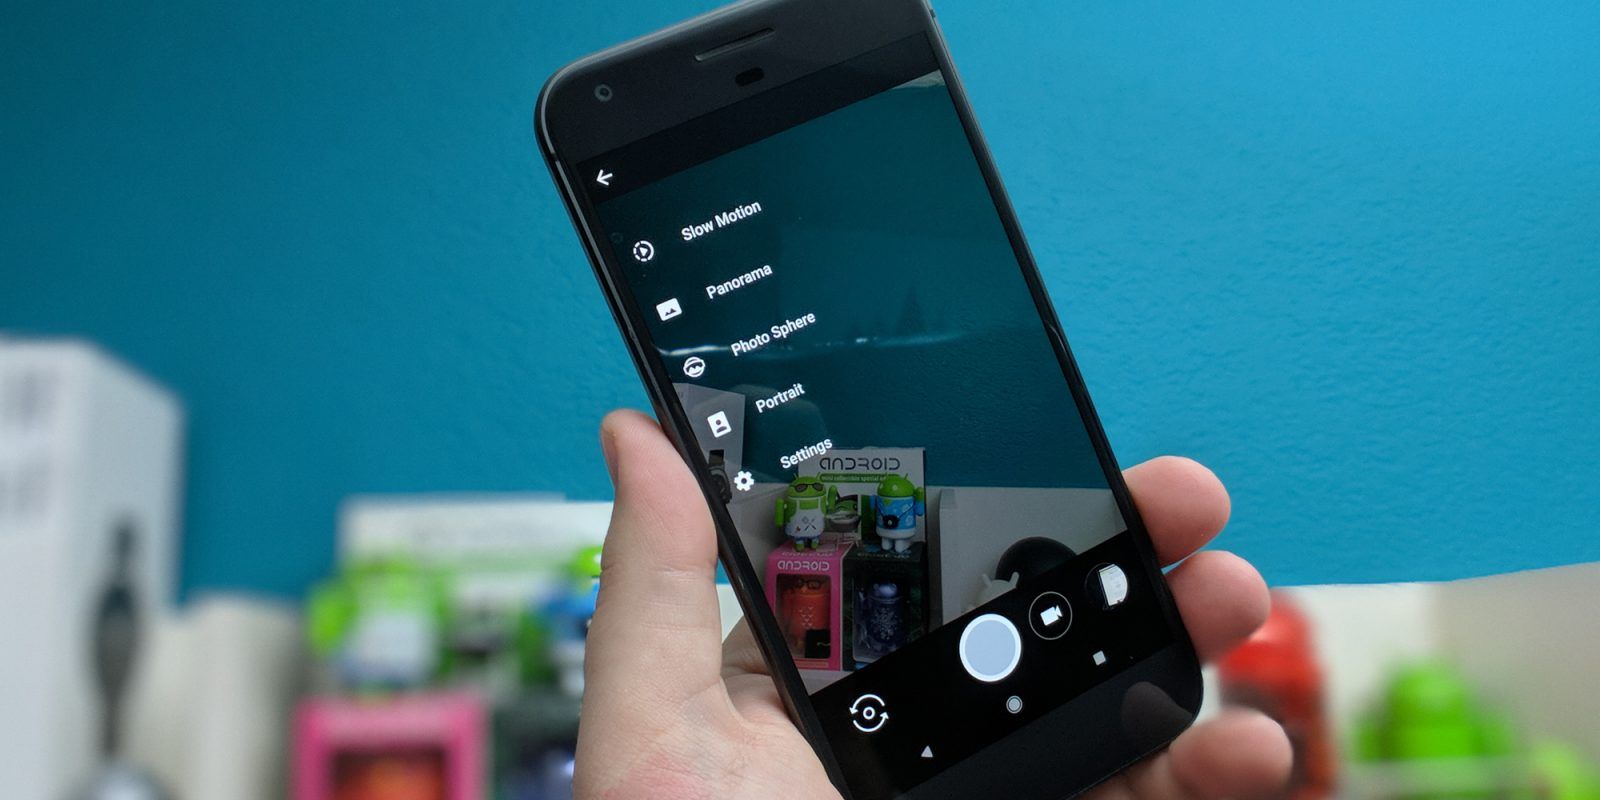 camera nx download for android 7.0